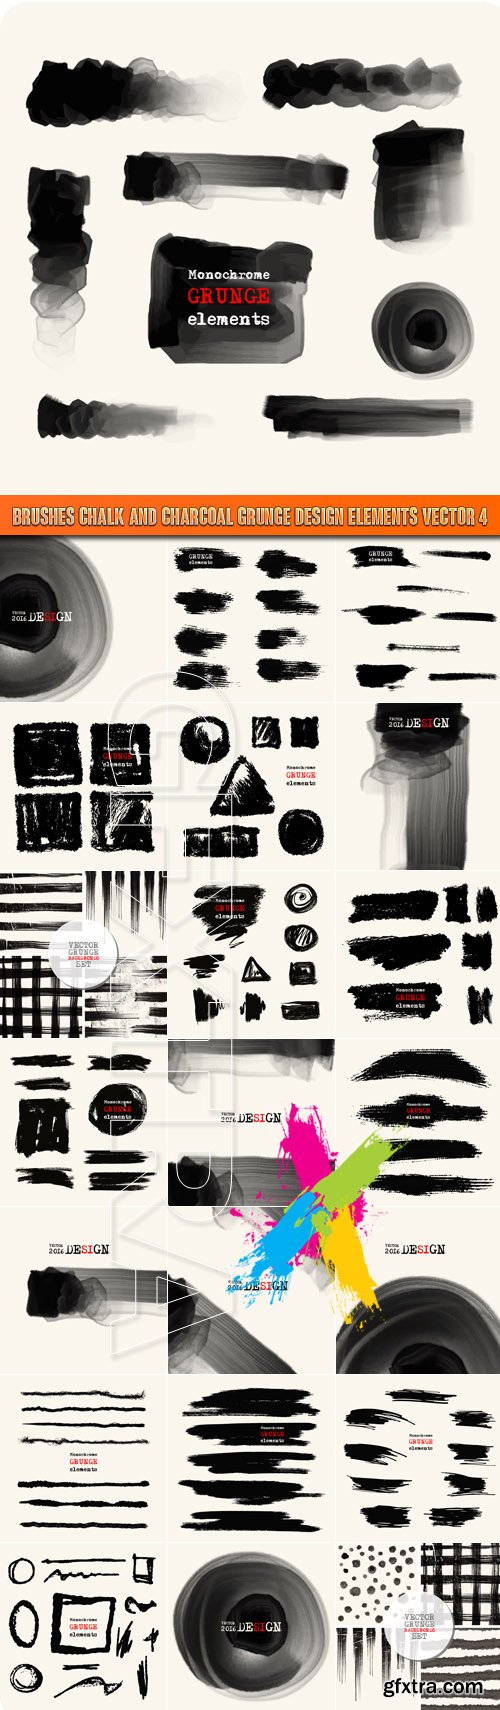 Brushes chalk and charcoal grunge design elements vector 4